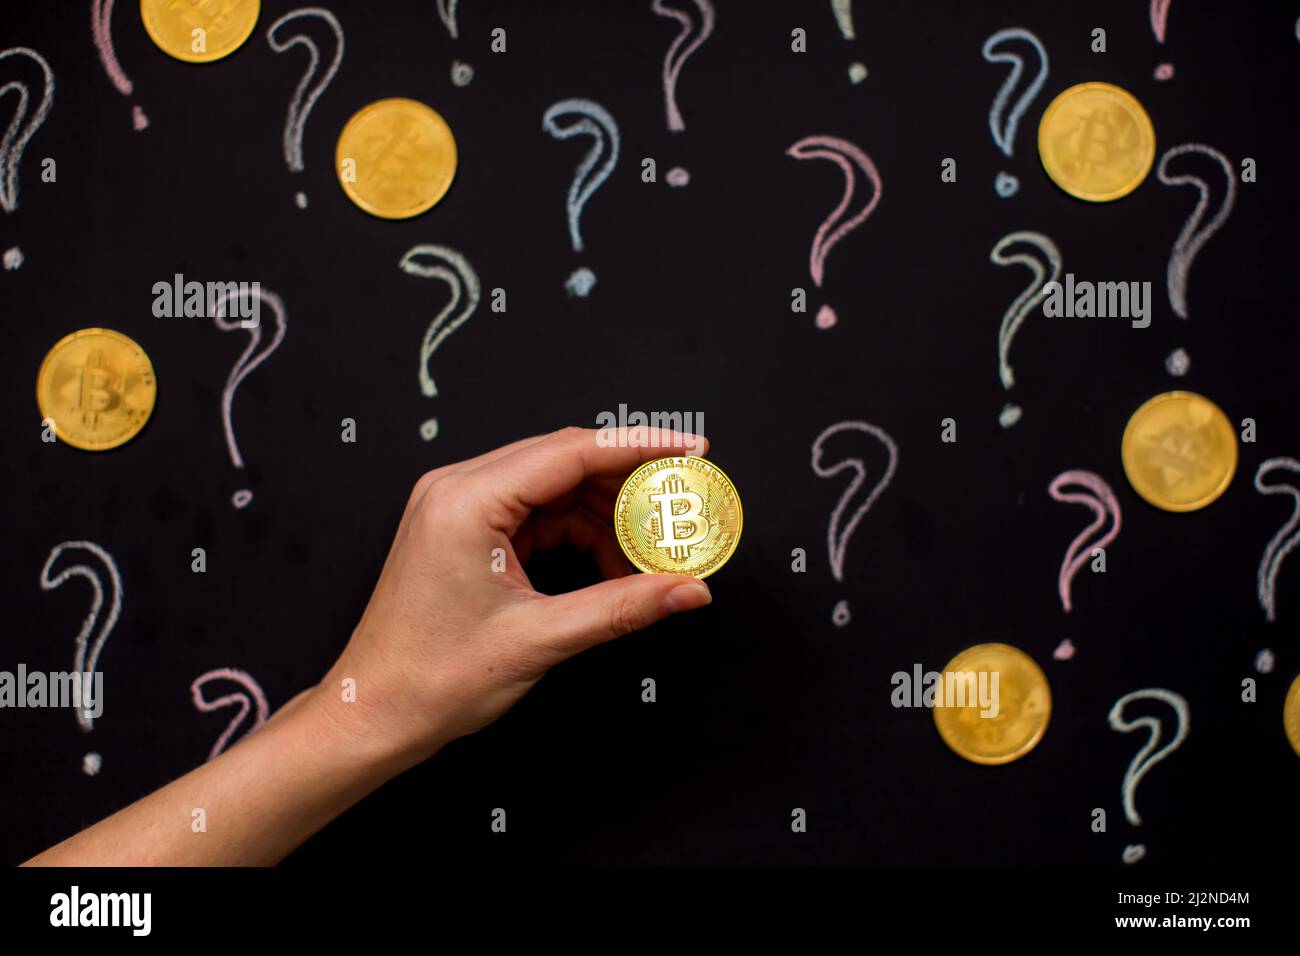 Hand holding Bitcoin virtual money against blackboard with question marks. Digital currency concept Stock Photo